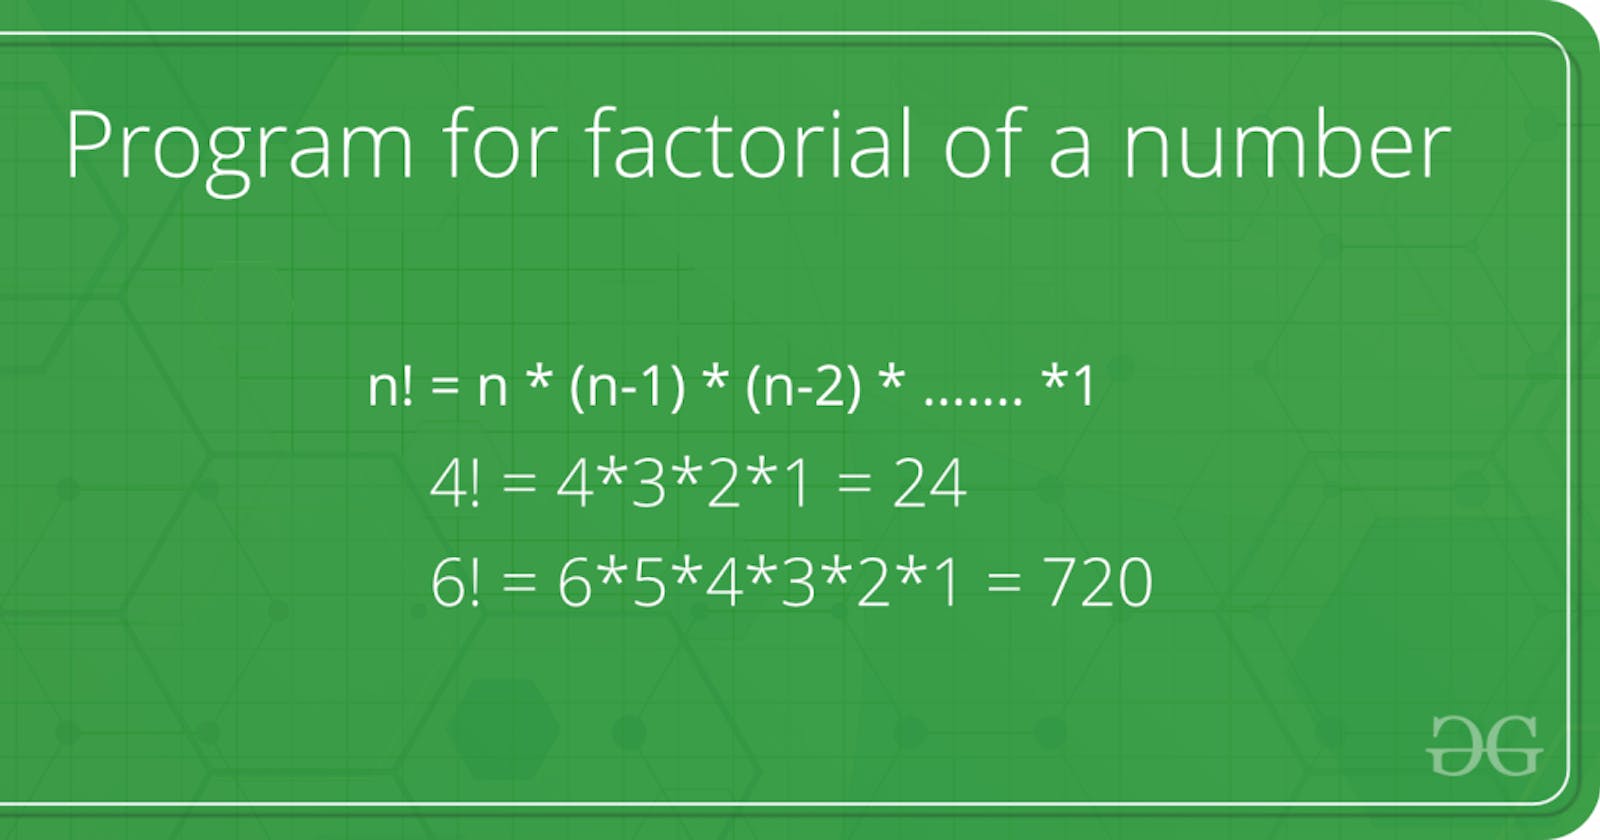 Factorial of a number